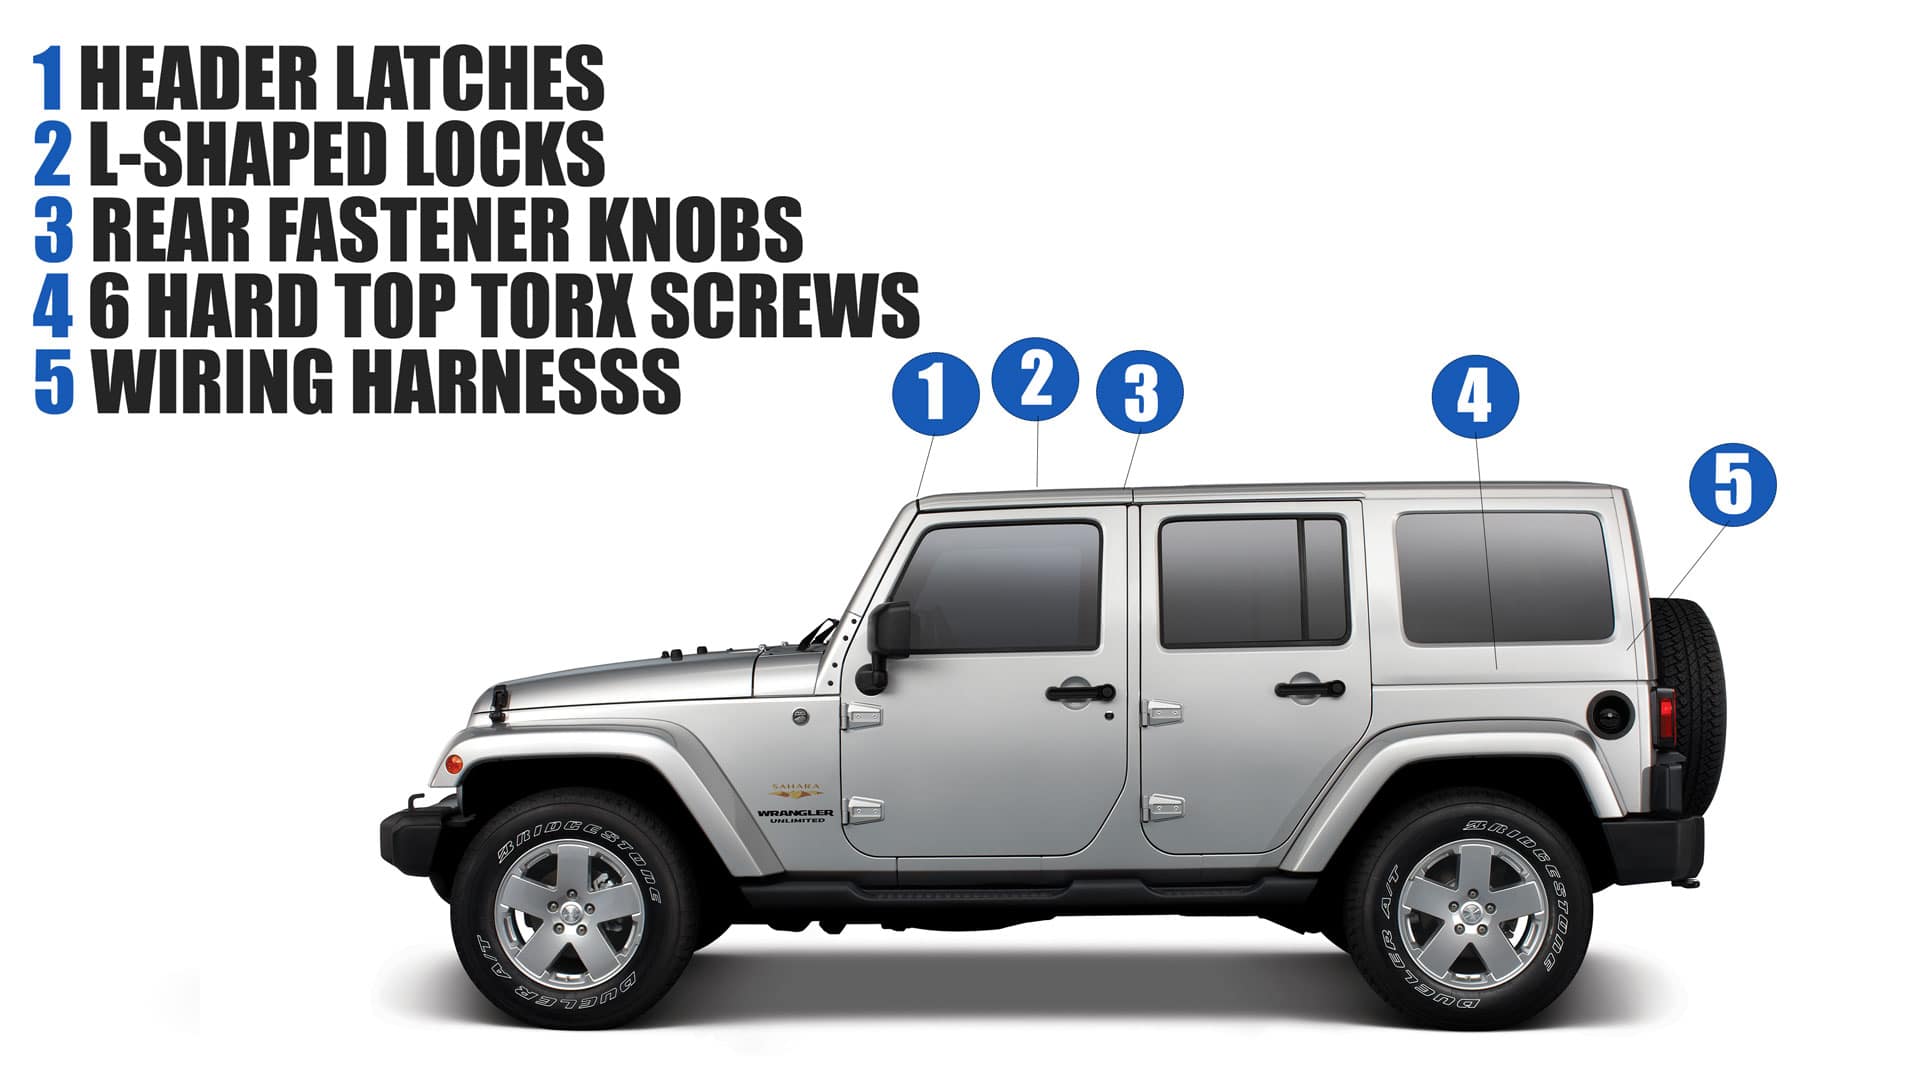 Remove The Hard Top on Your Wrangler | faqs | Safford of Warrenton